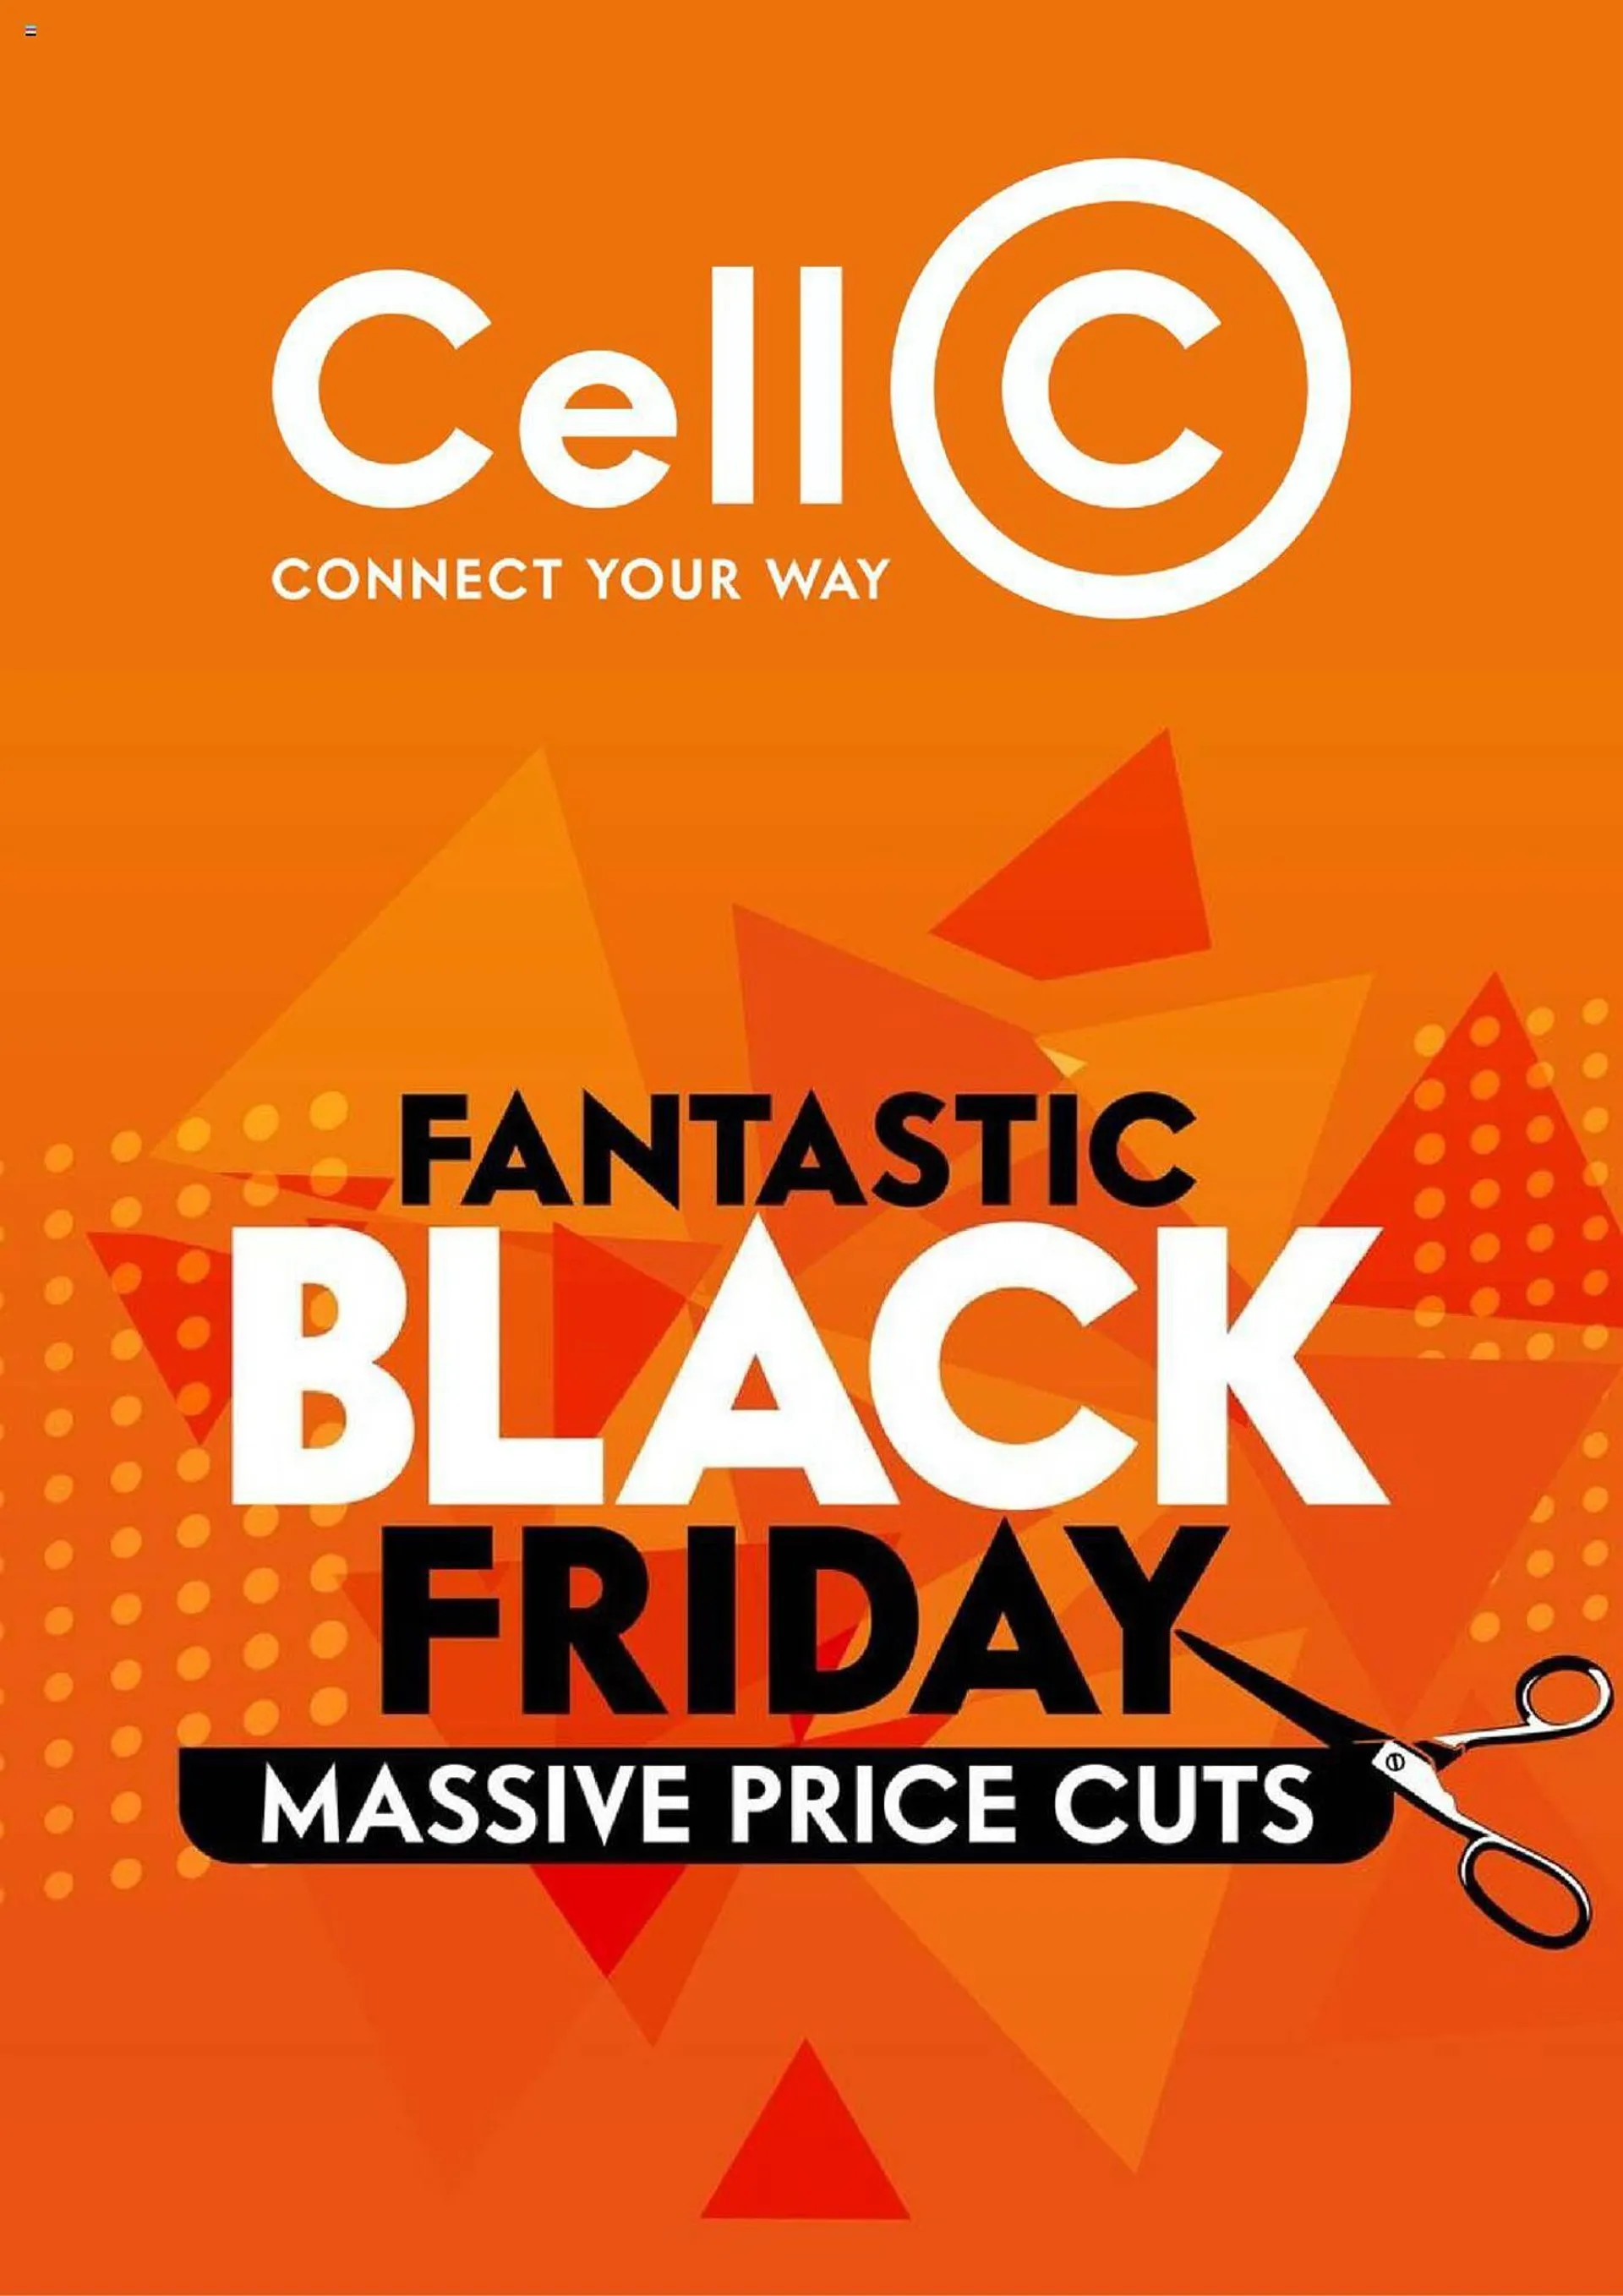 Cell C catalogue